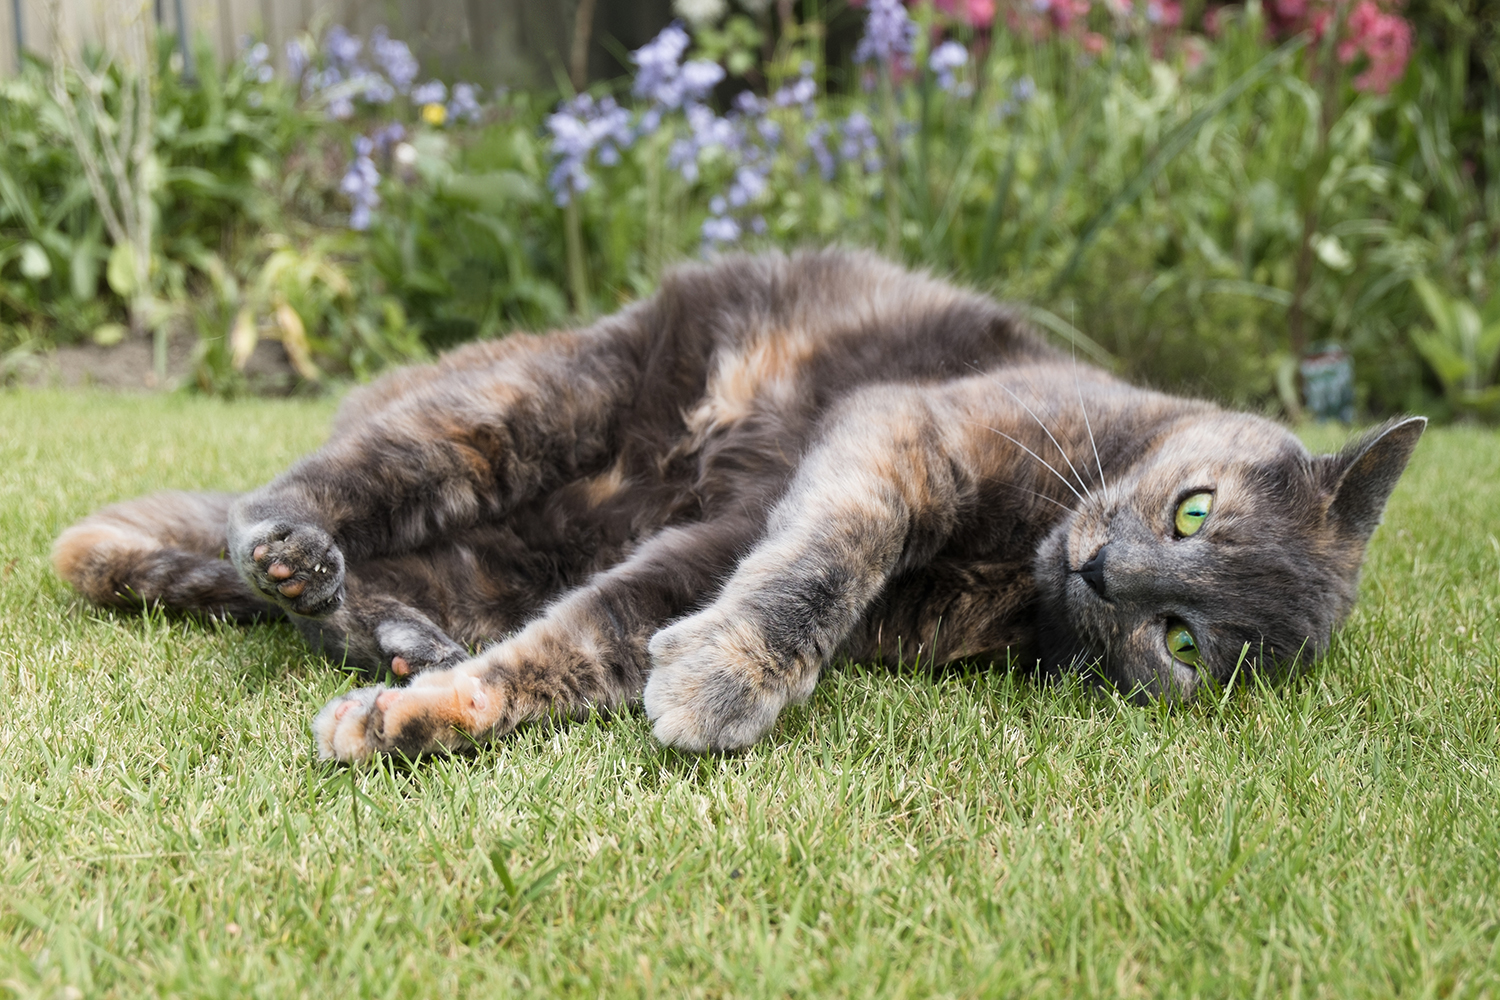 Small grey and brown tabby/tortoiseshell cat lying on grass in the garden